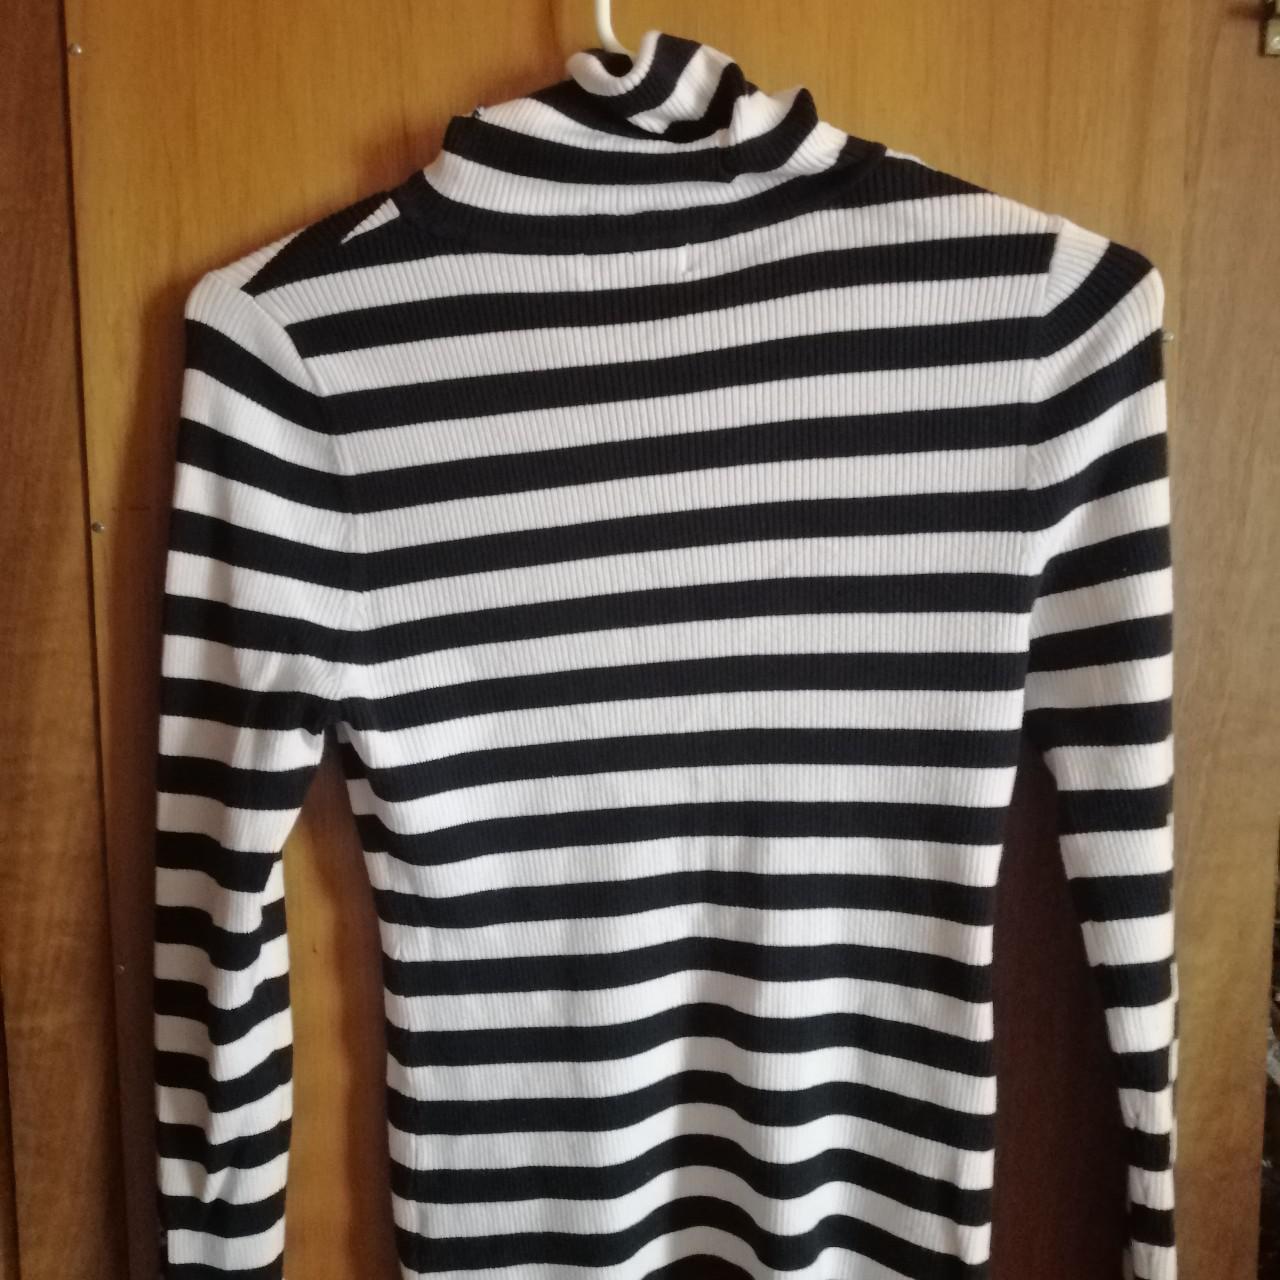 Stripped turtleneck 🦓 - pretty thick, not quite... - Depop